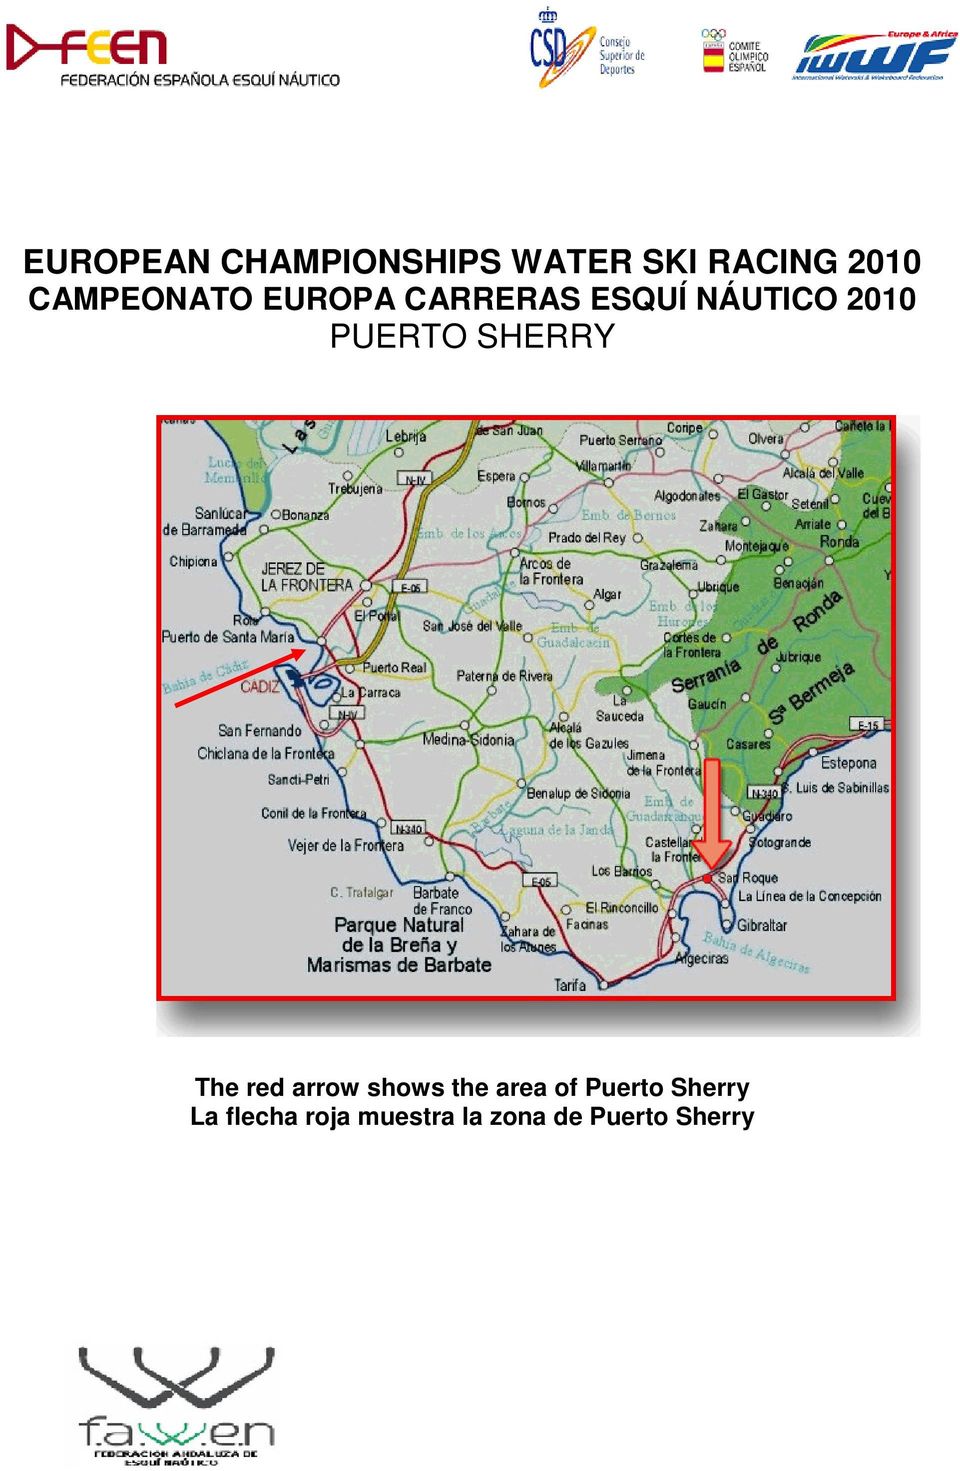 PUERTO SHERRY The red arrow shows the area of